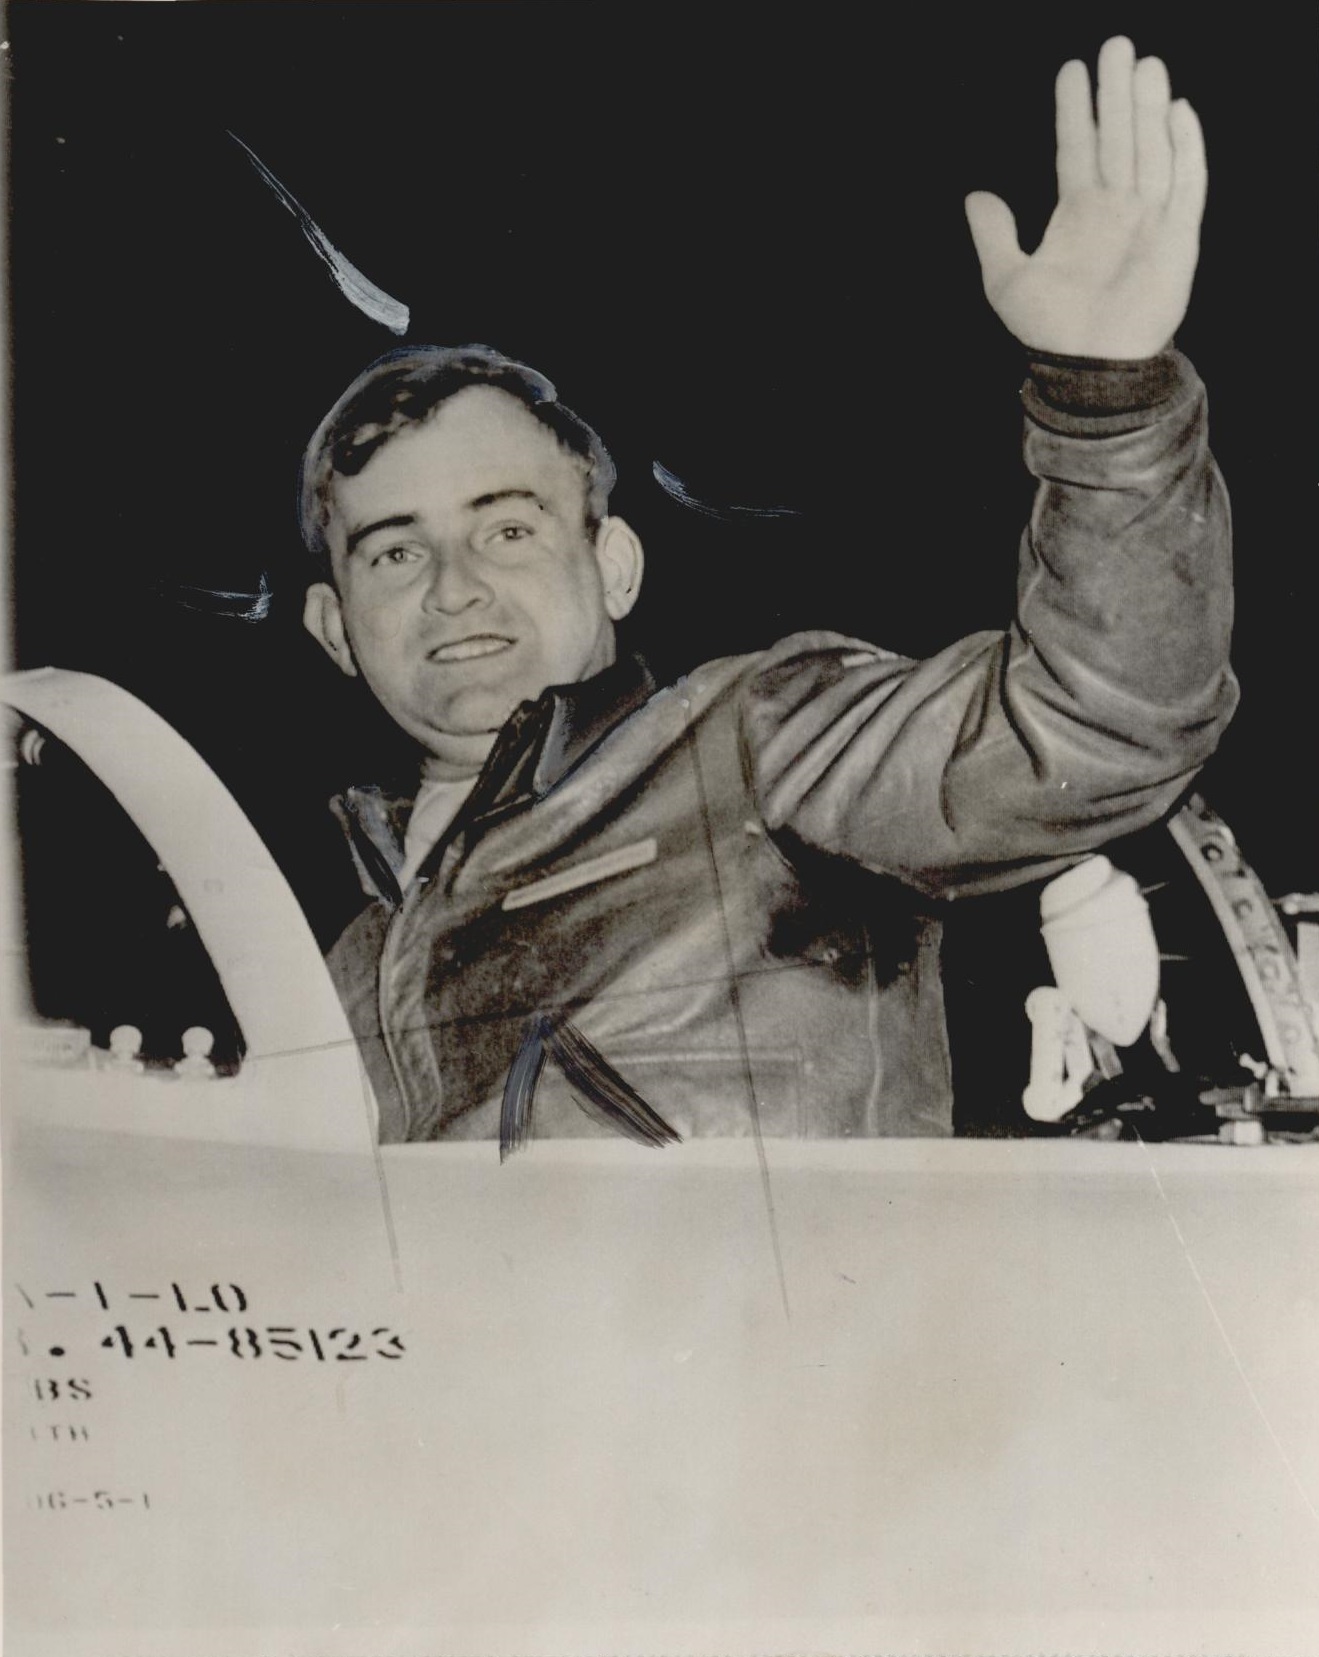 Colonel William H. Councill, U.S. Air force, waves from the cockpit of his record-setting Lockheed P-80A-1-LO Shooting Star, 44-85123. (AP Wirephoto, Oklahoma Historical Society) 